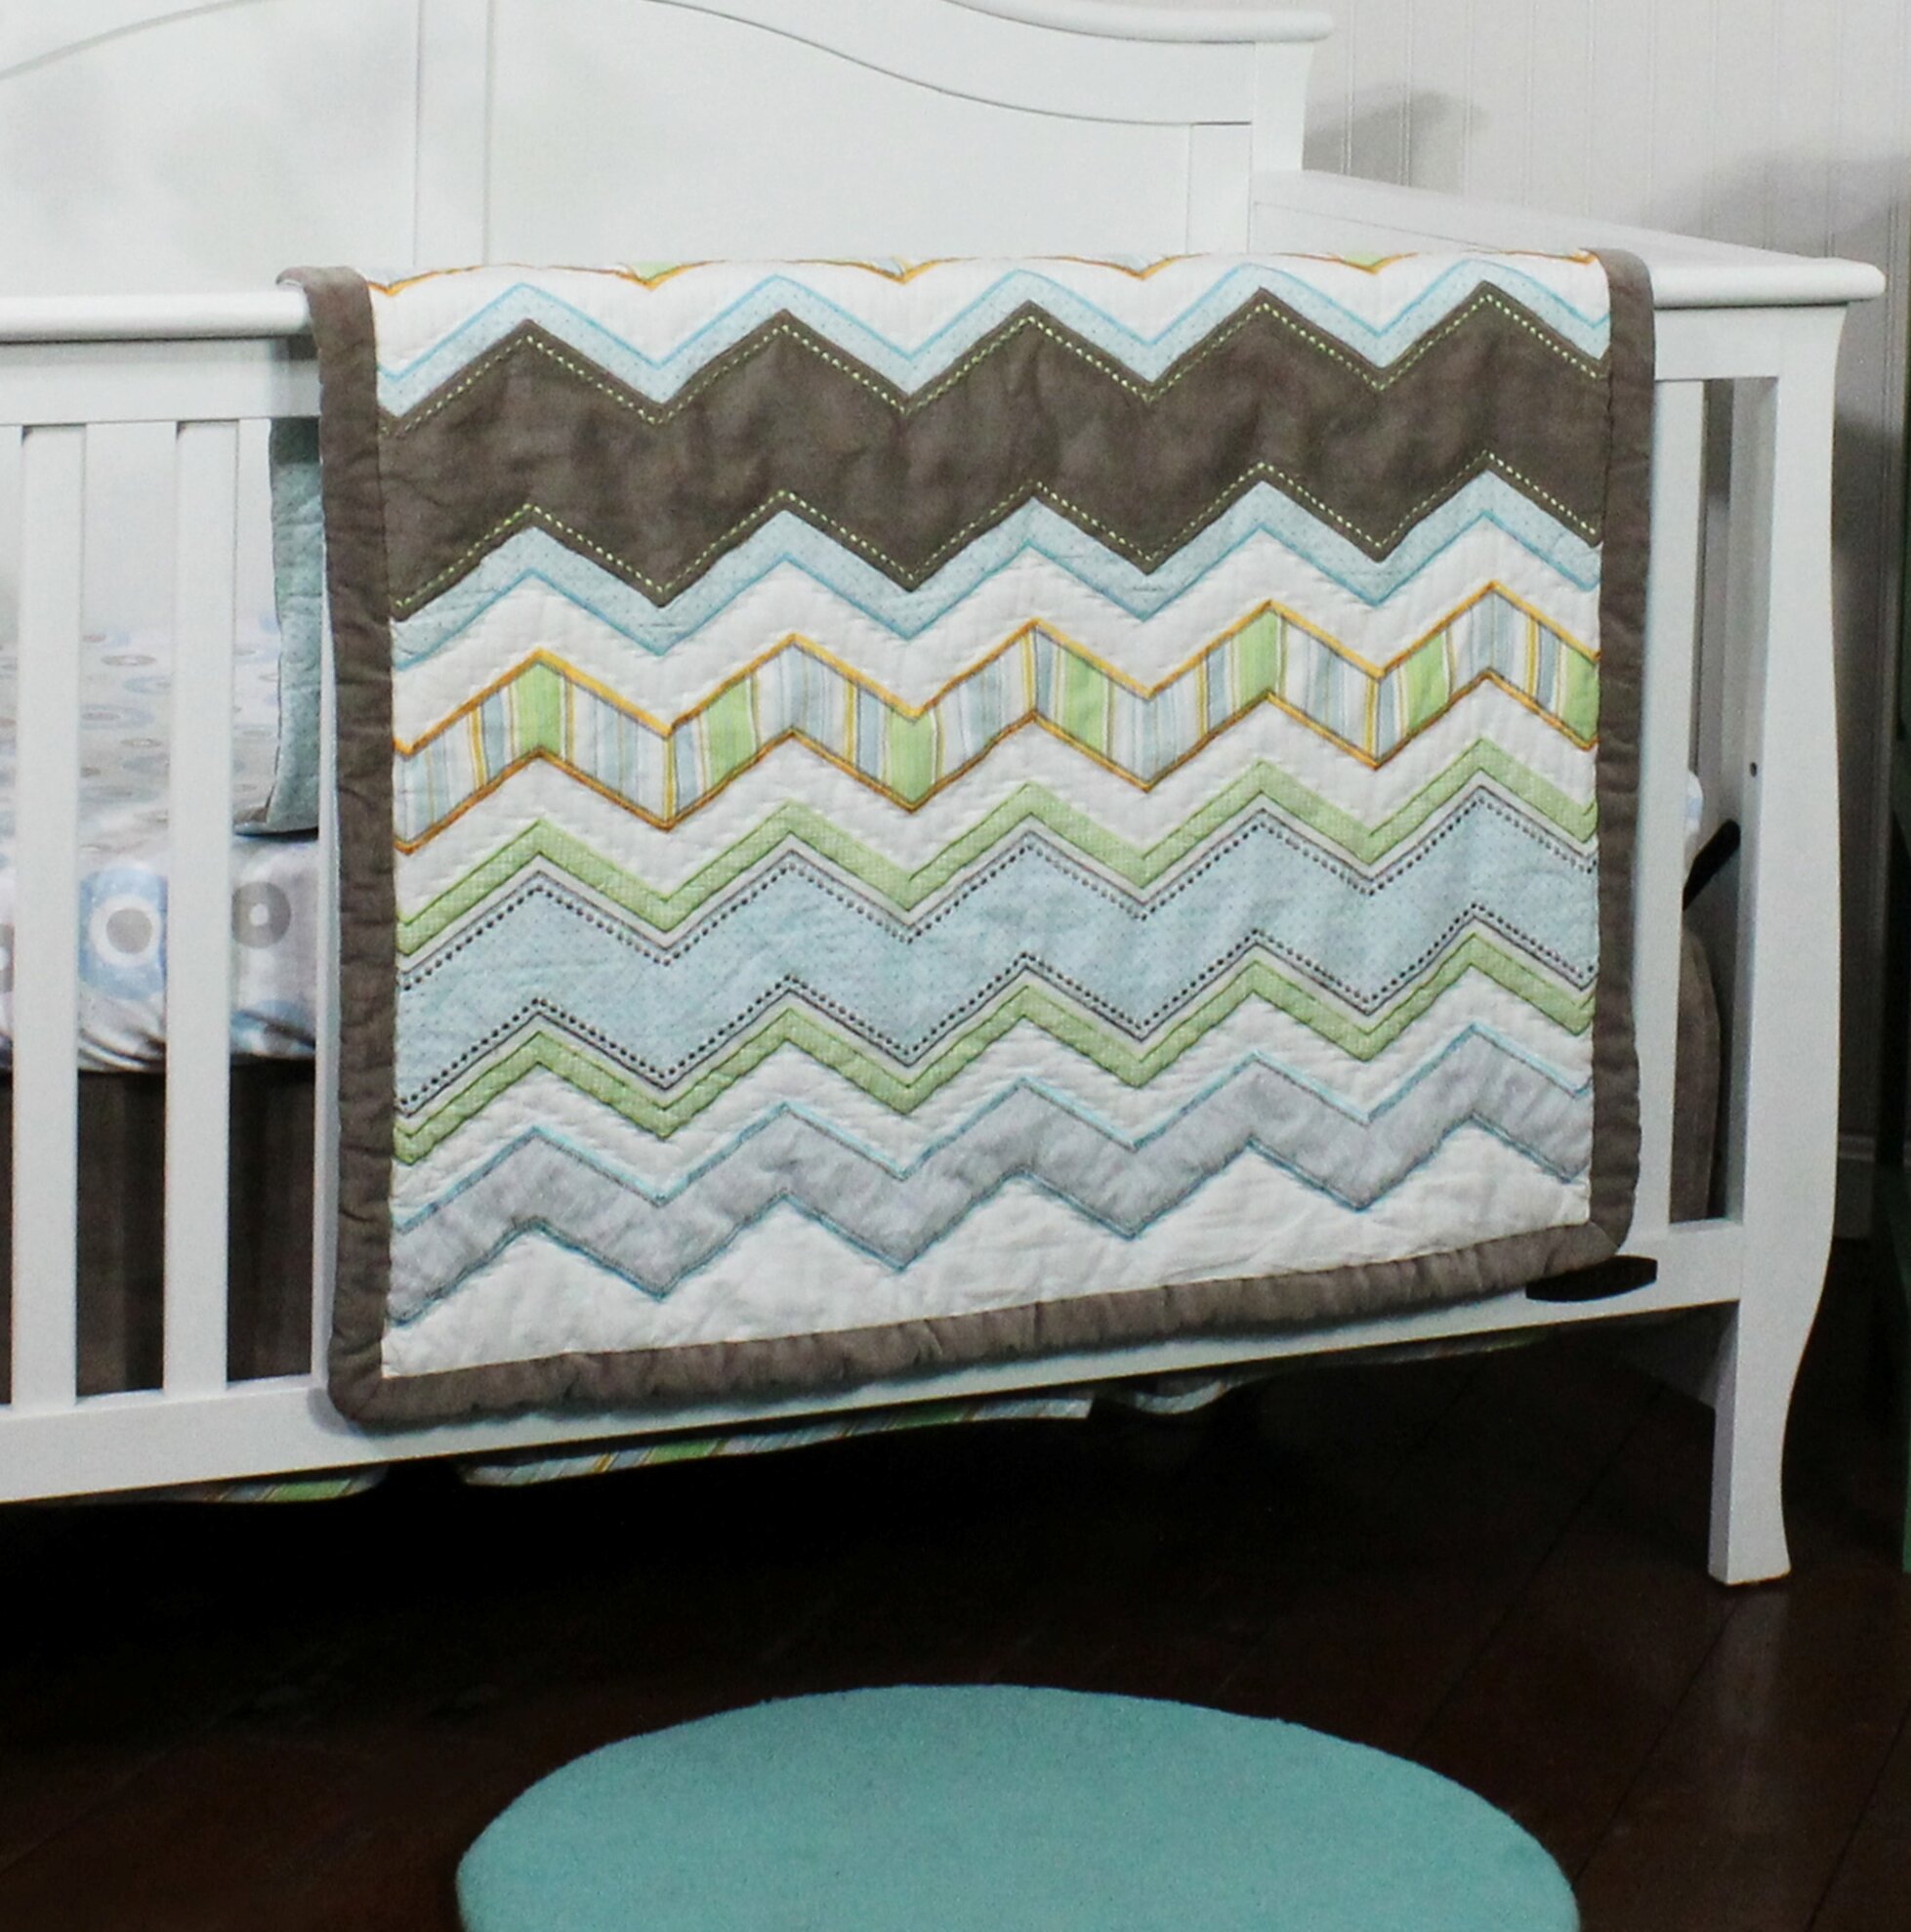 green baby quilt